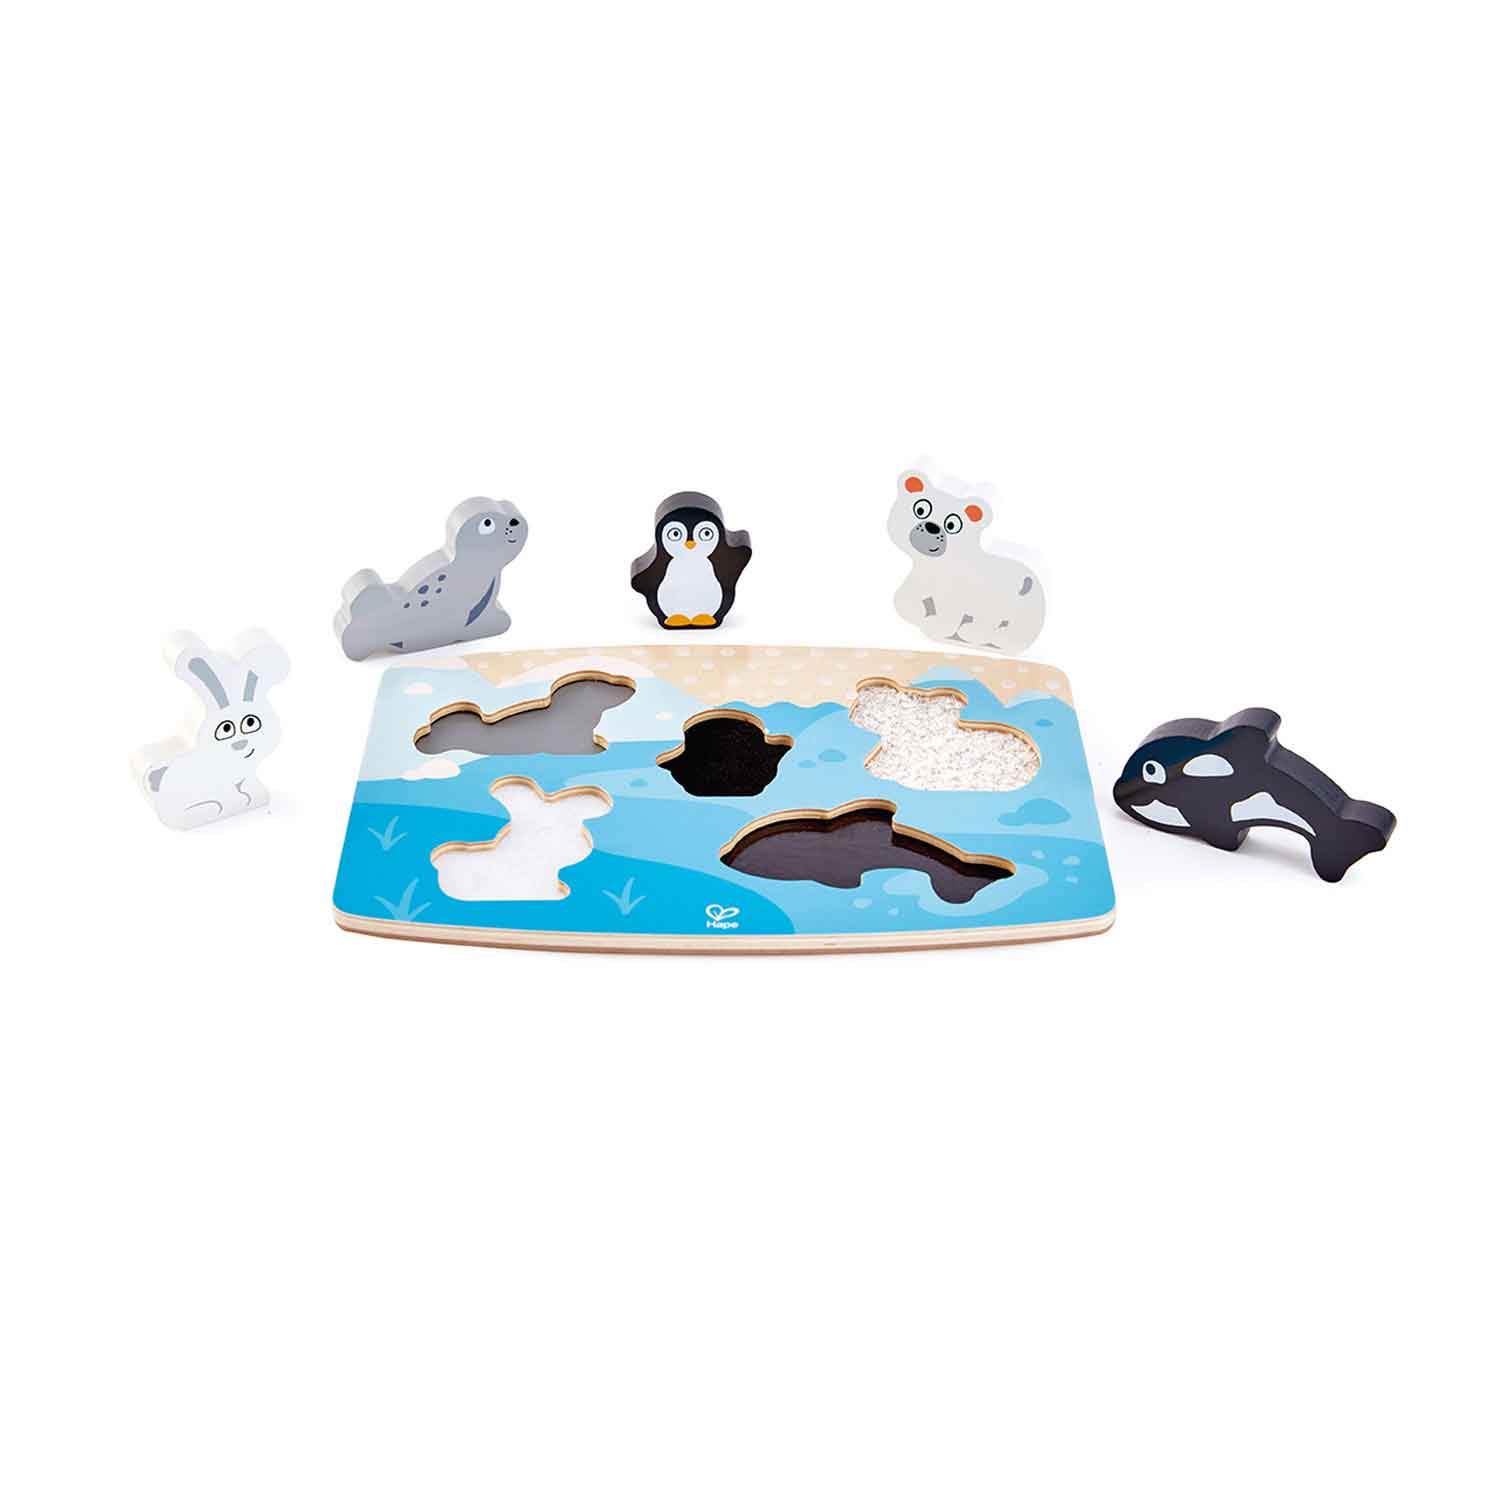 Tactile Animal Puzzles